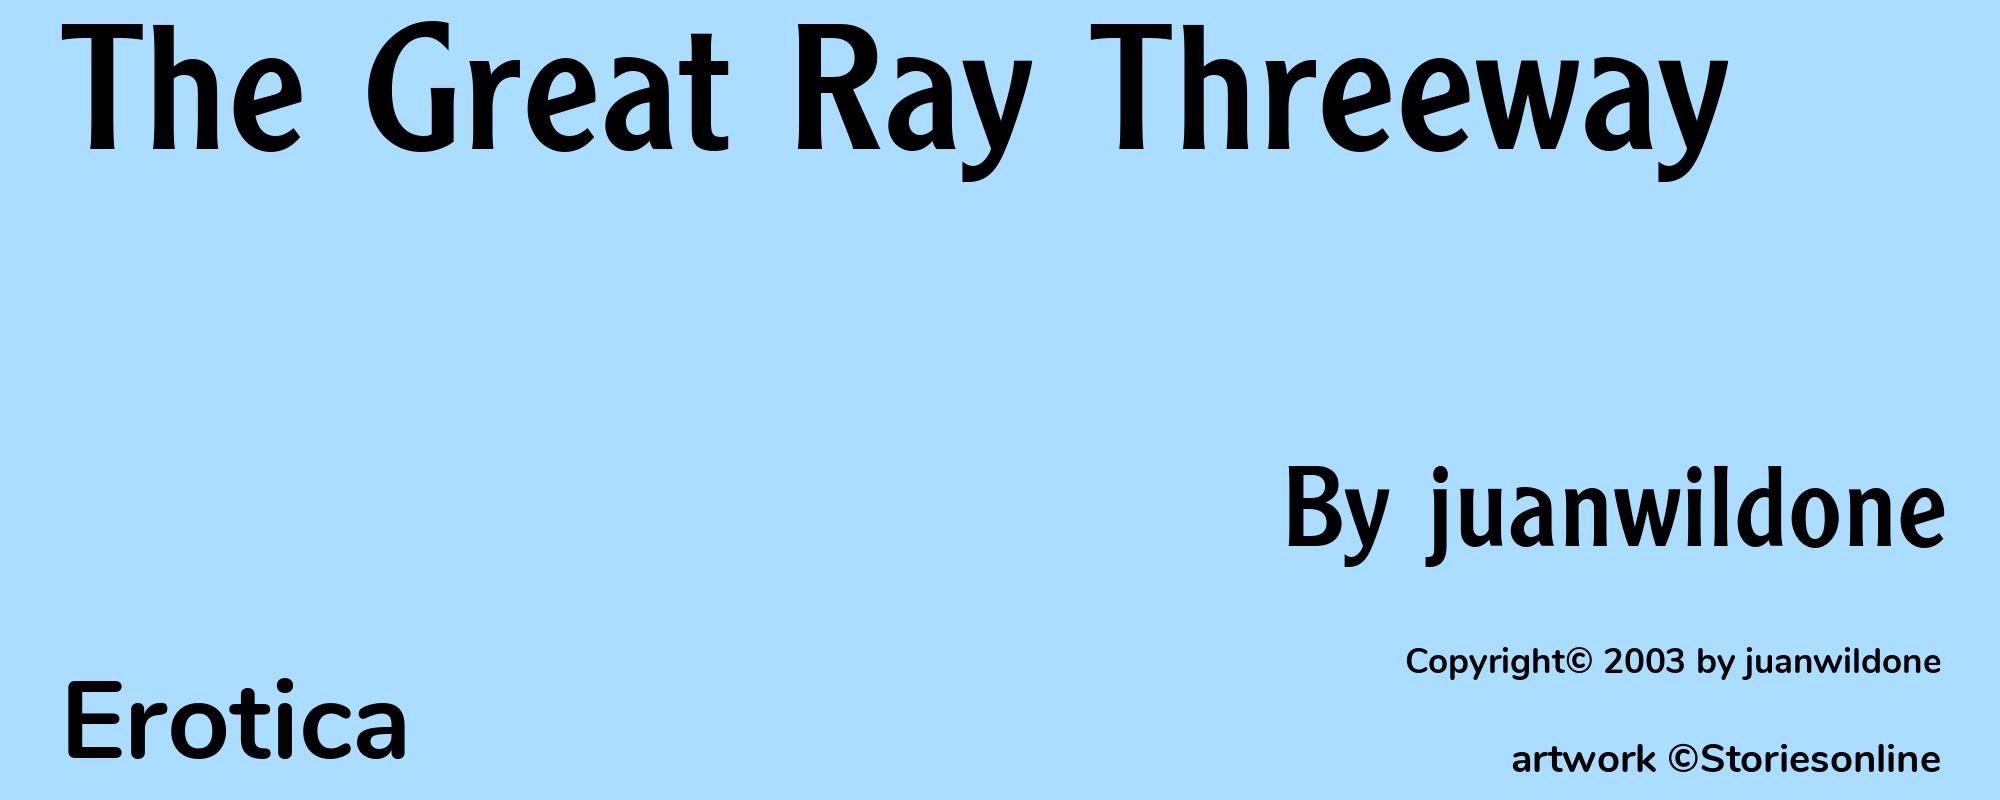 The Great Ray Threeway - Cover